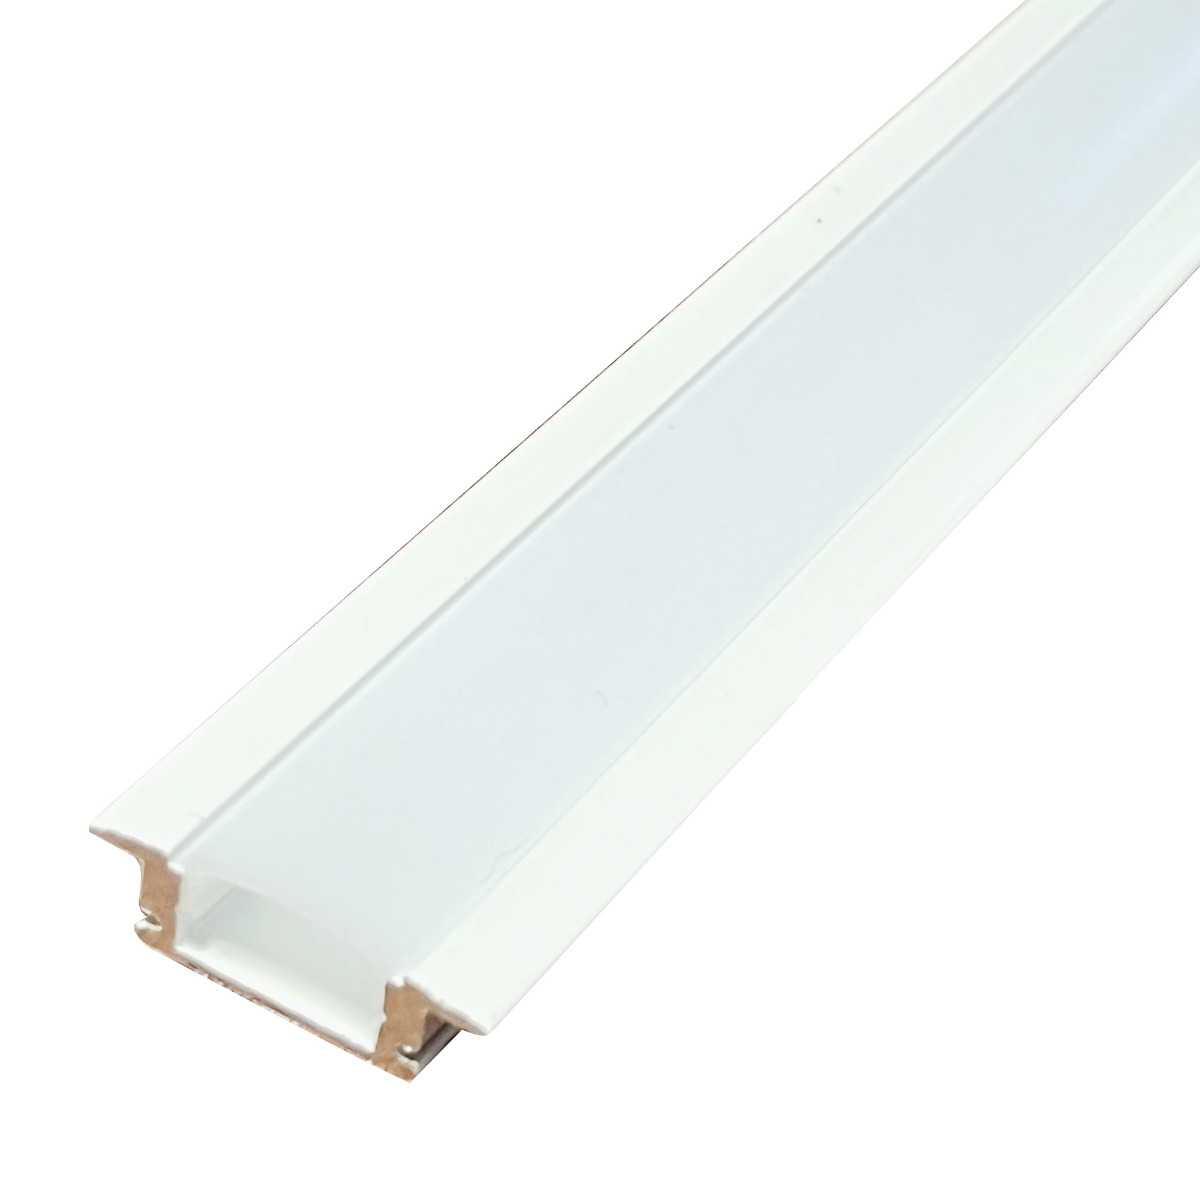 View 2m White Recessed 7mm LED Profile With Frosted Cover information